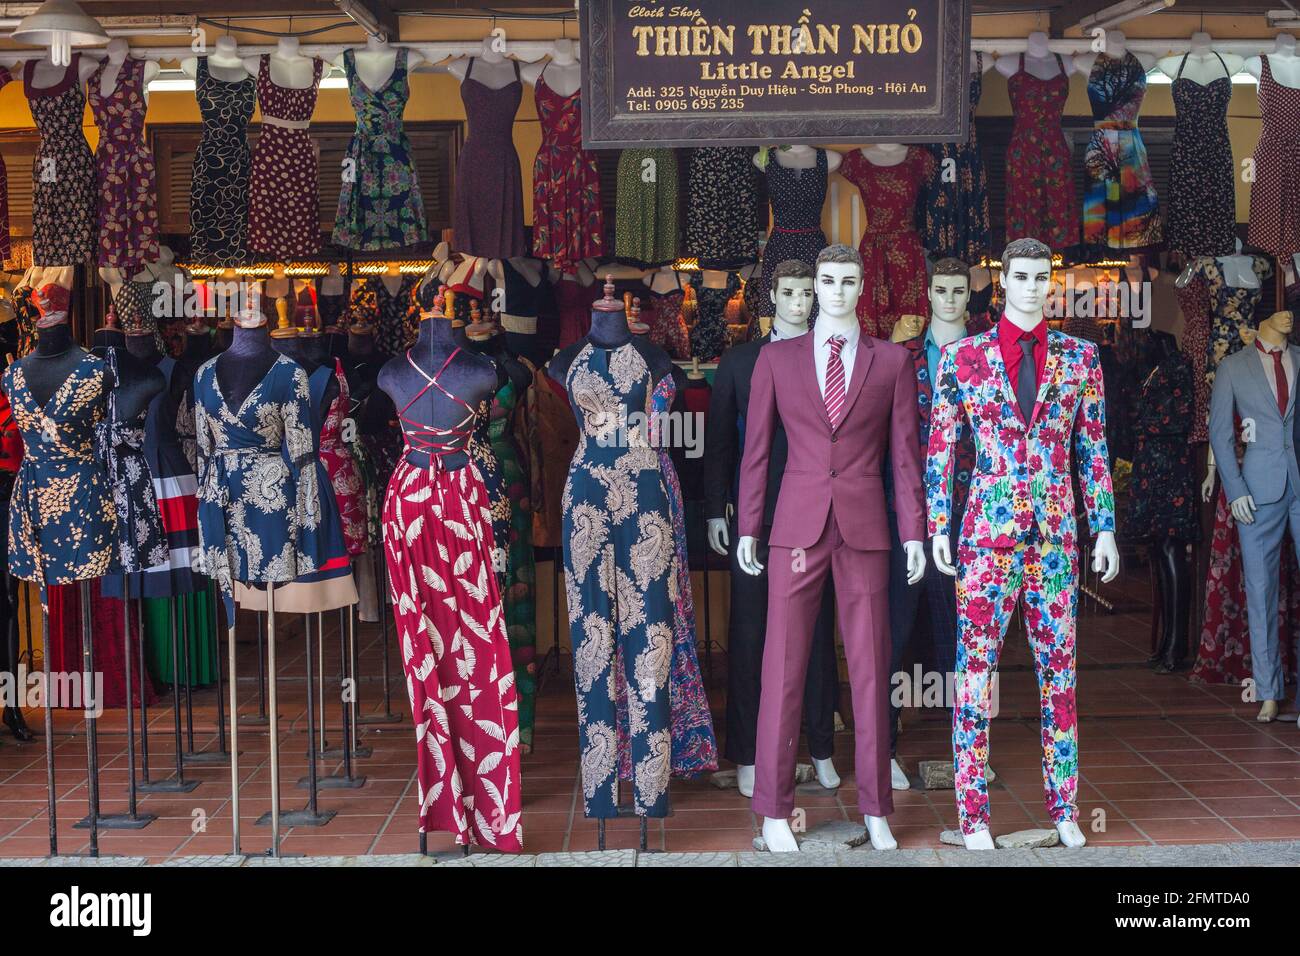 Snazzy designs on shop mannequins outside textile trader in Hoi An, Vietnam Stock Photo